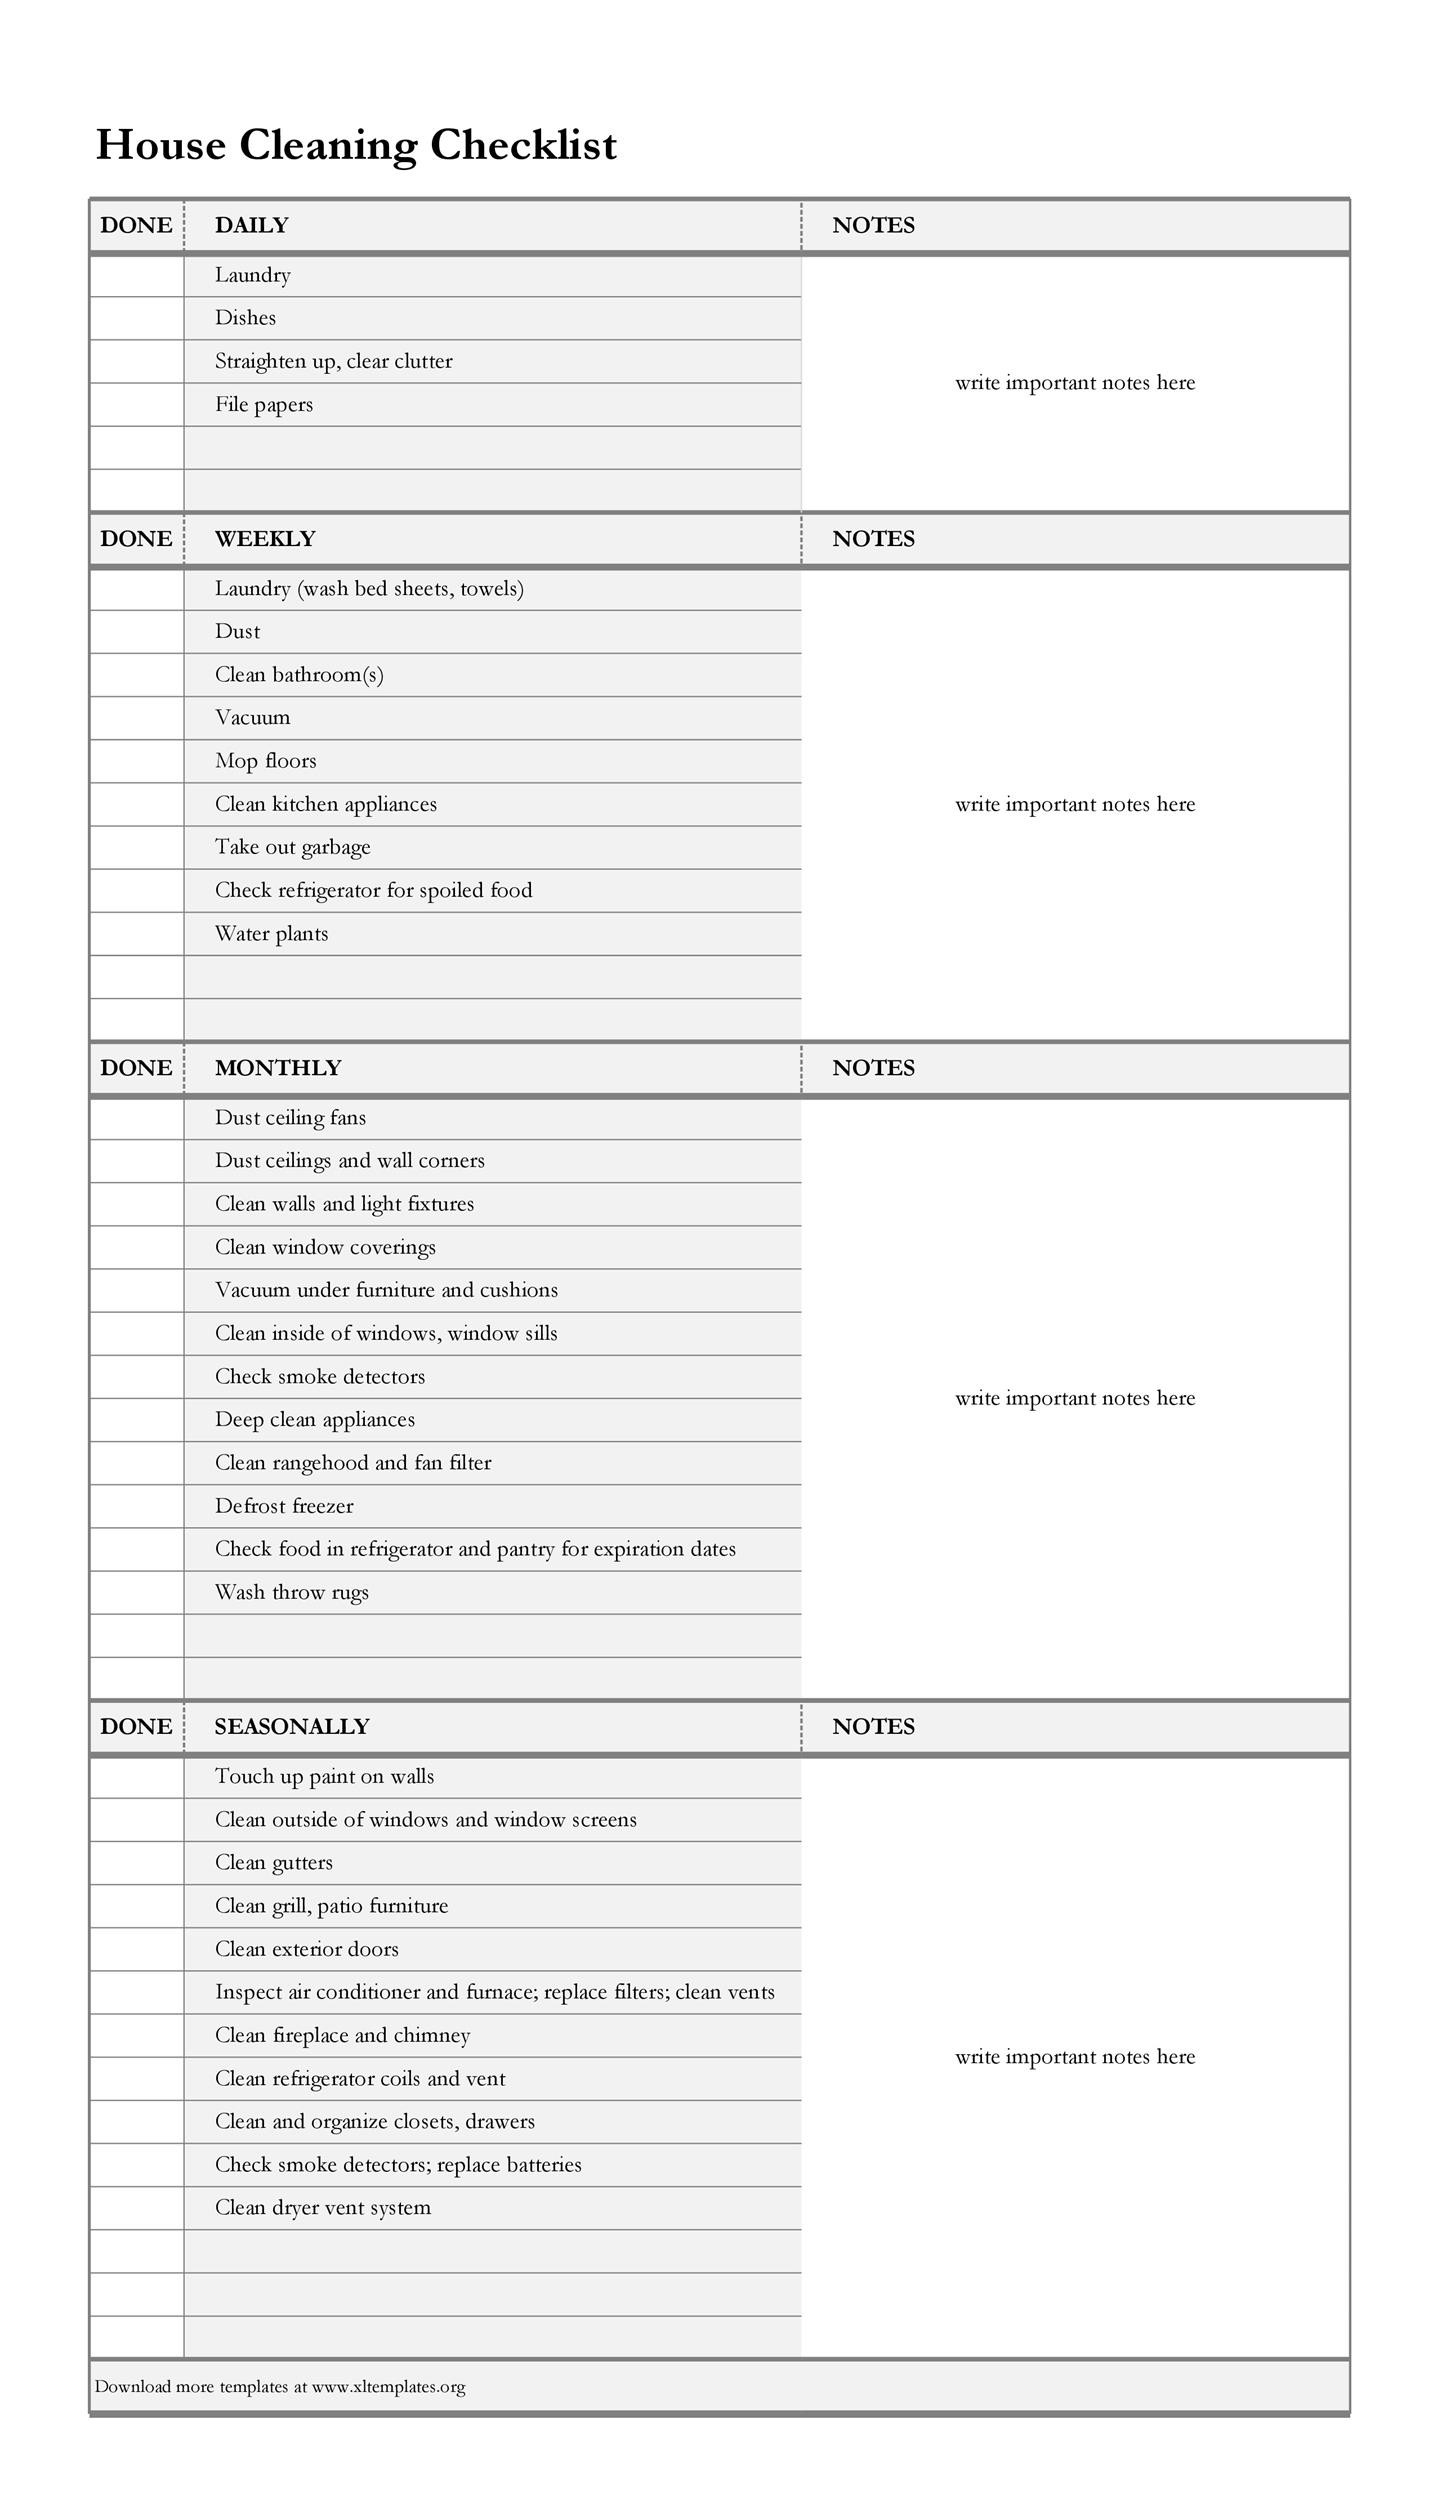 free-printable-house-cleaning-template-printable-templates